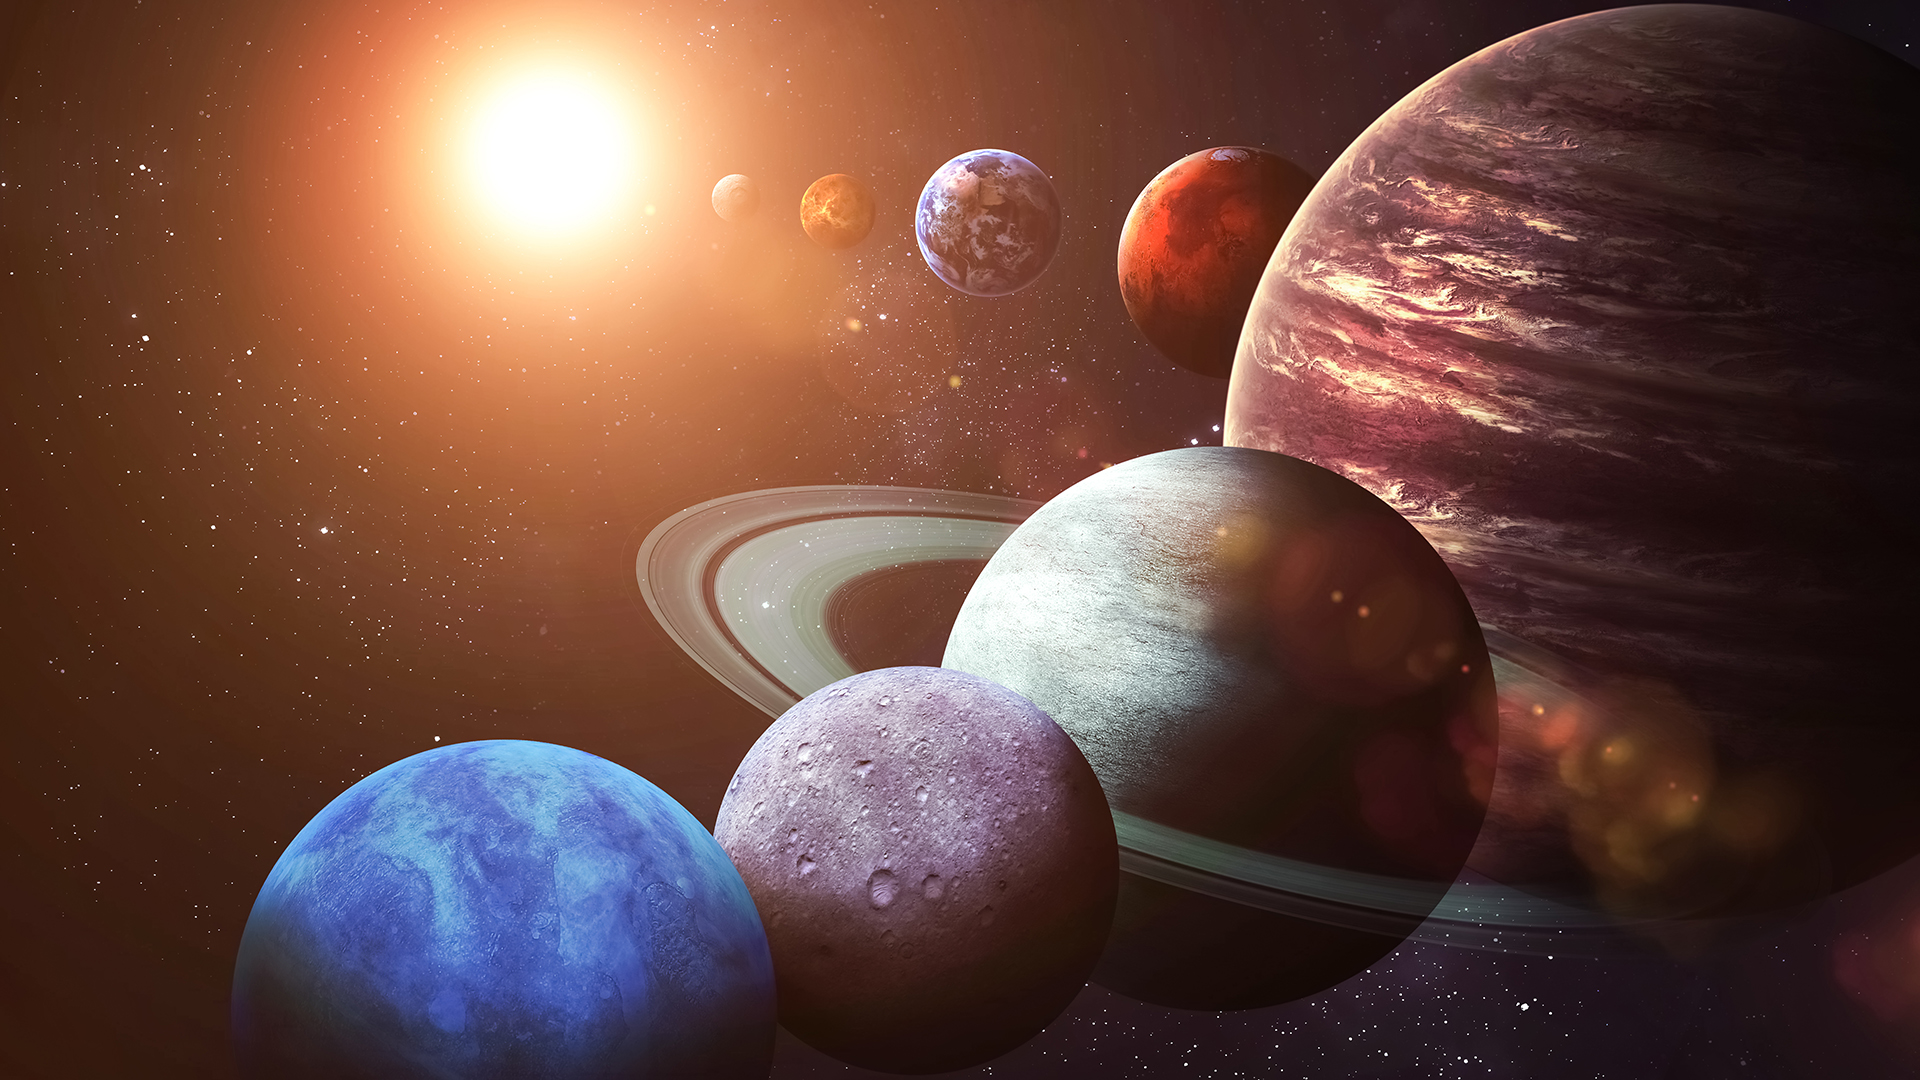 Four planetary system architectures discovered by researchers